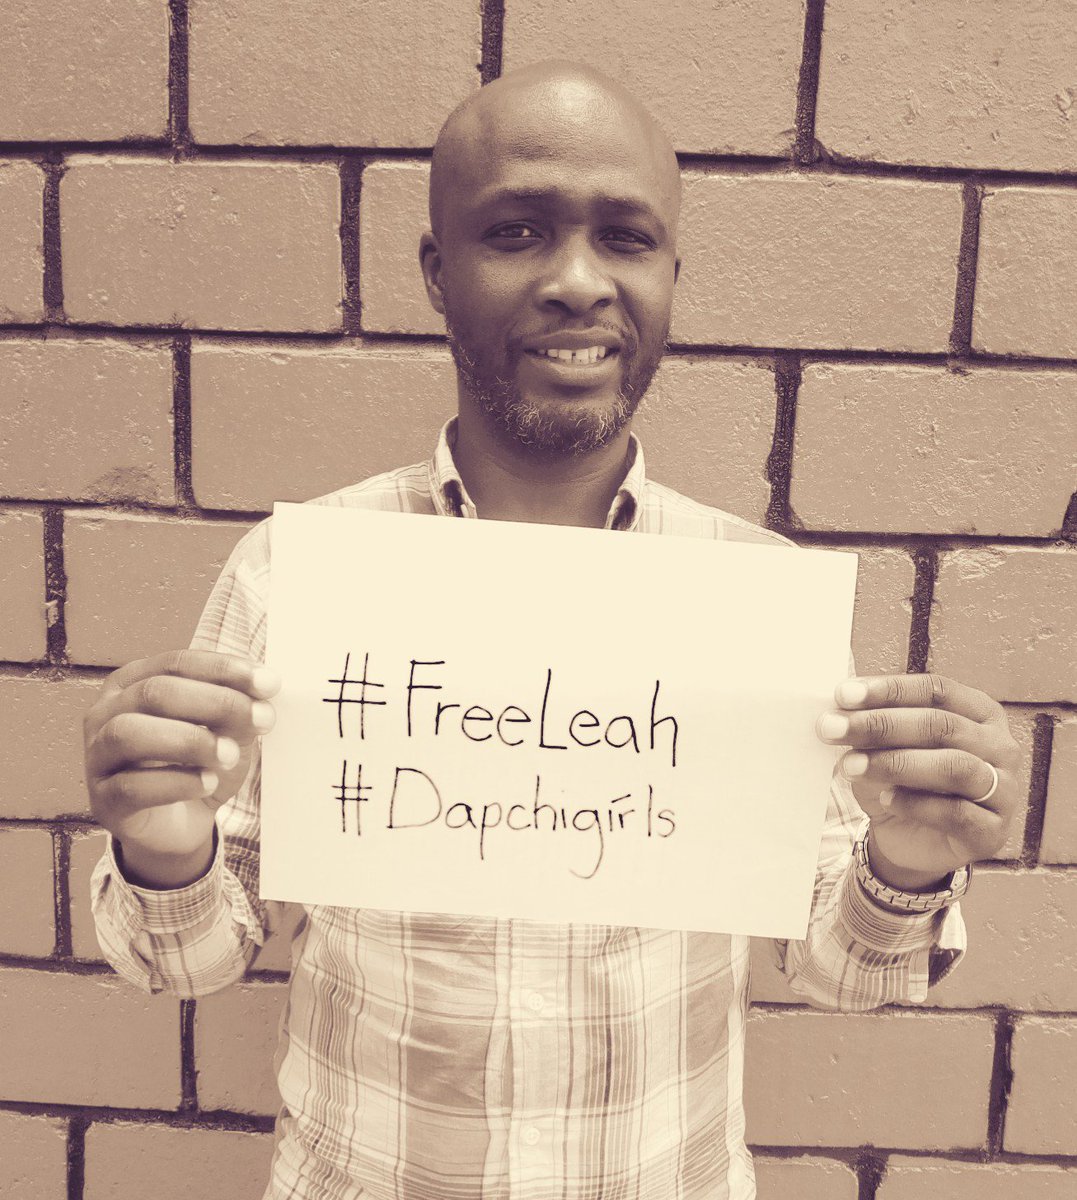 Happy Birthday Leah, the Lord is your shield and guide. 

#FreeLeah
#Dapchigirls.